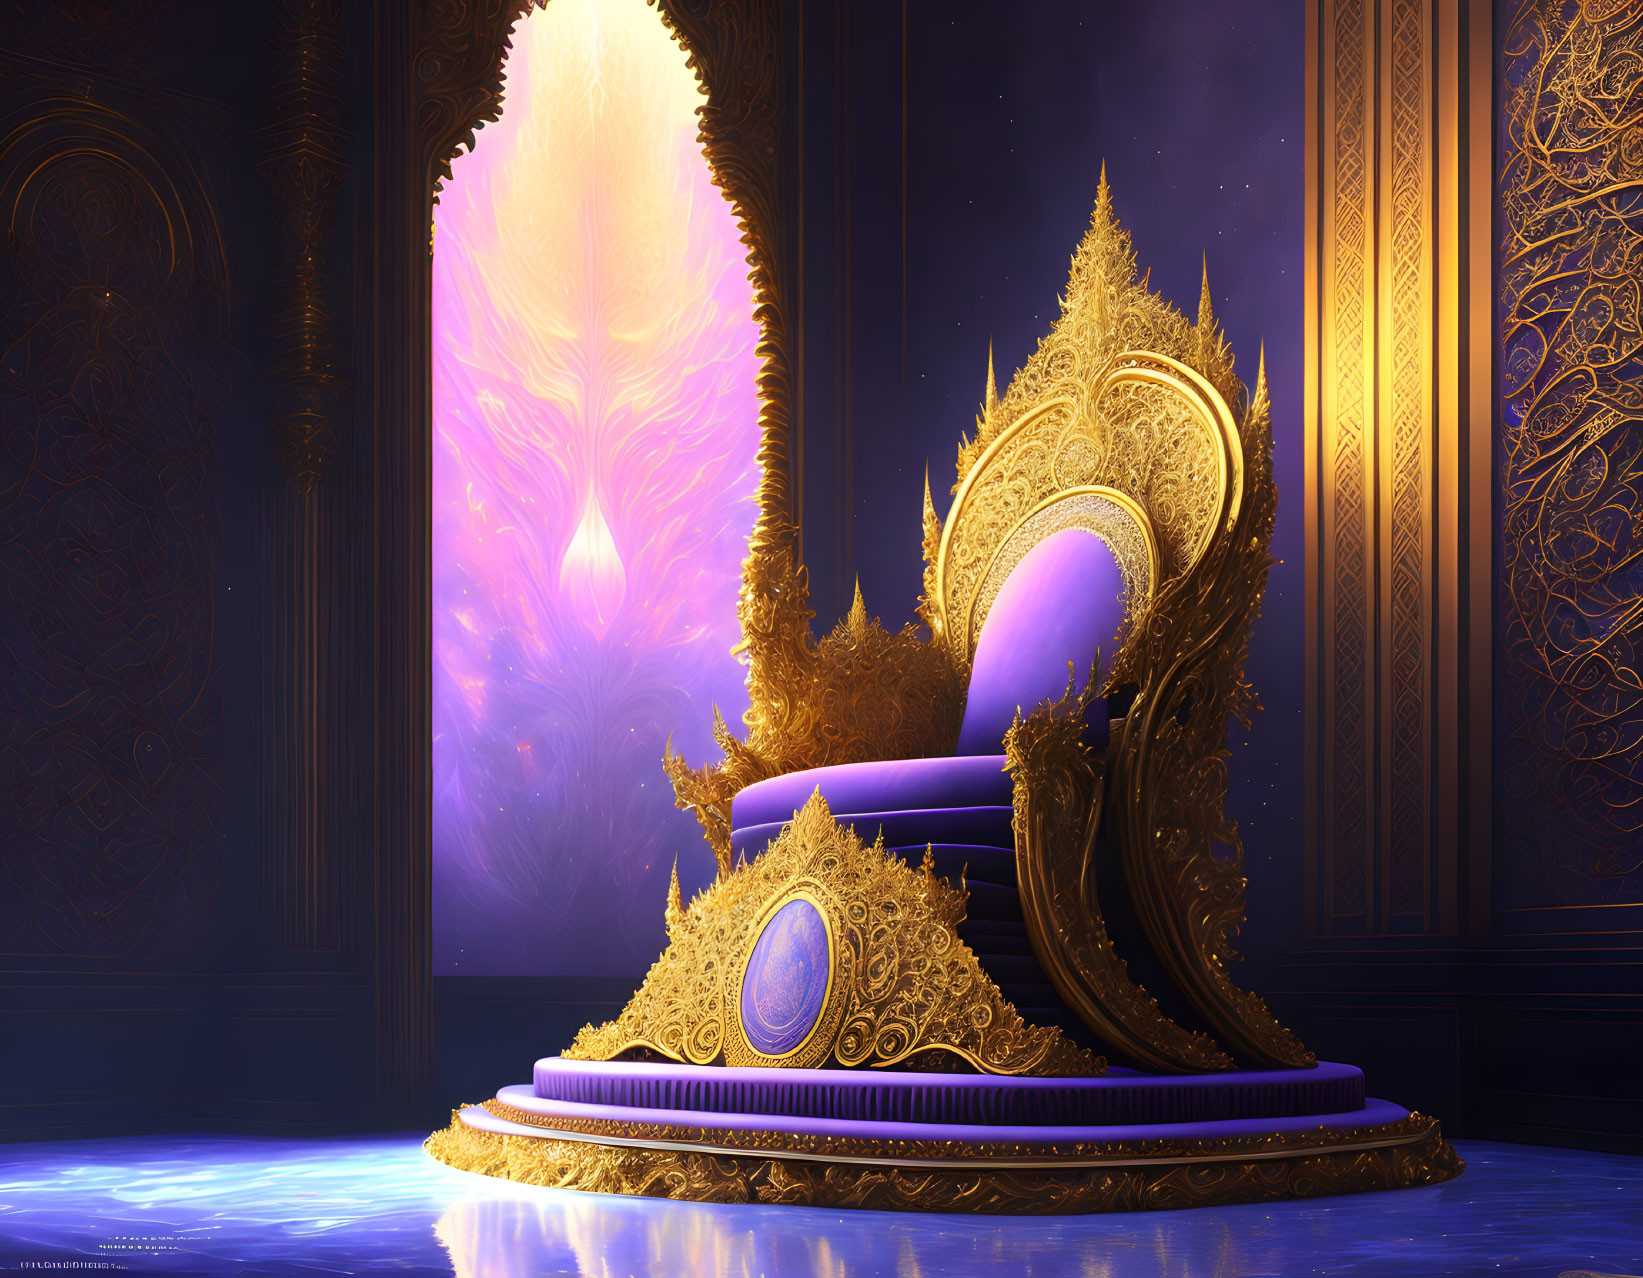 Regal golden throne with purple upholstery in ornate room with mystical backdrop